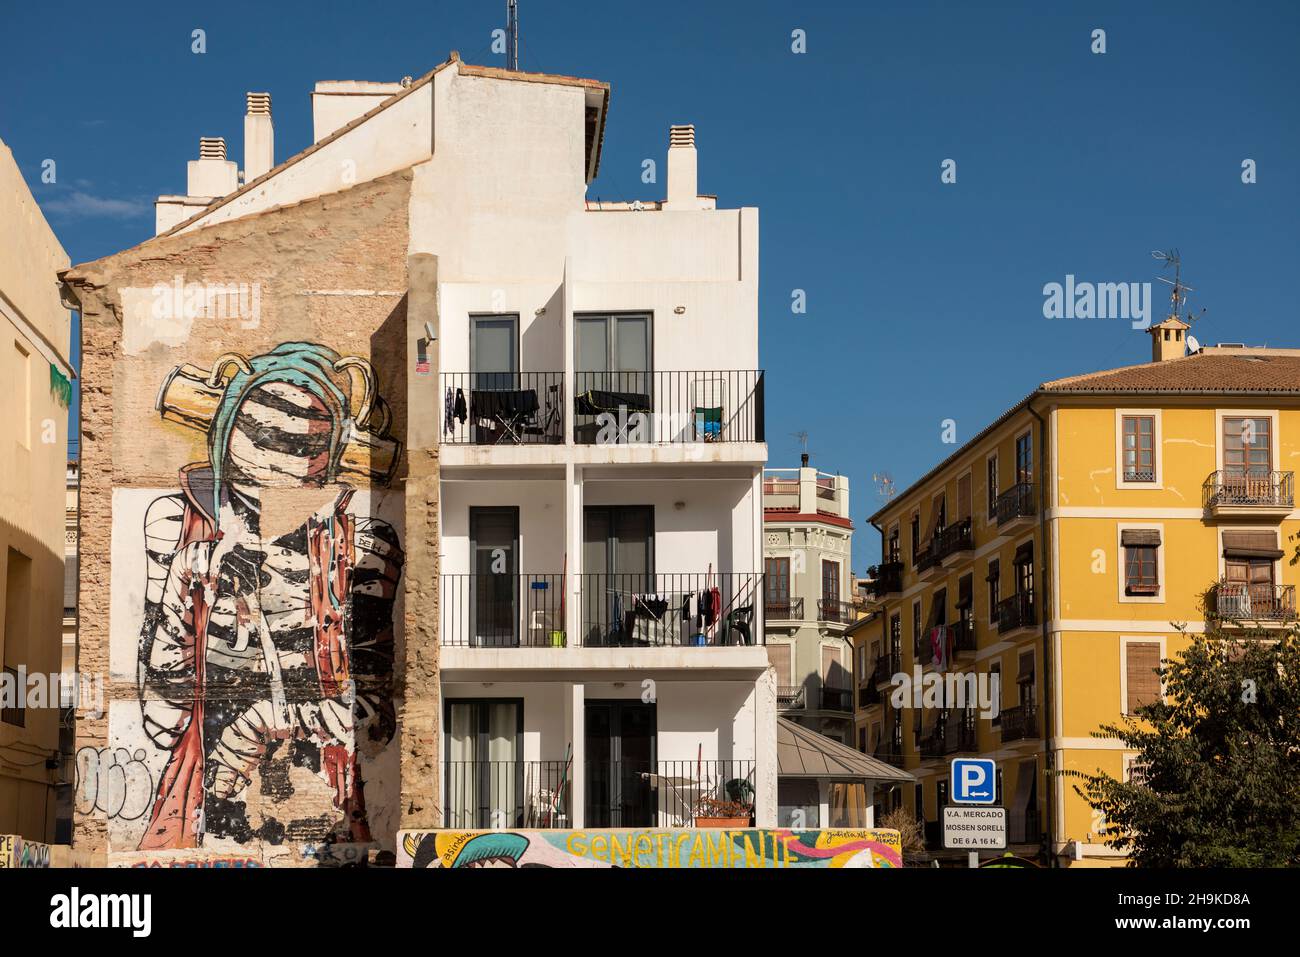 City building with street art in Valencia Stock Photo